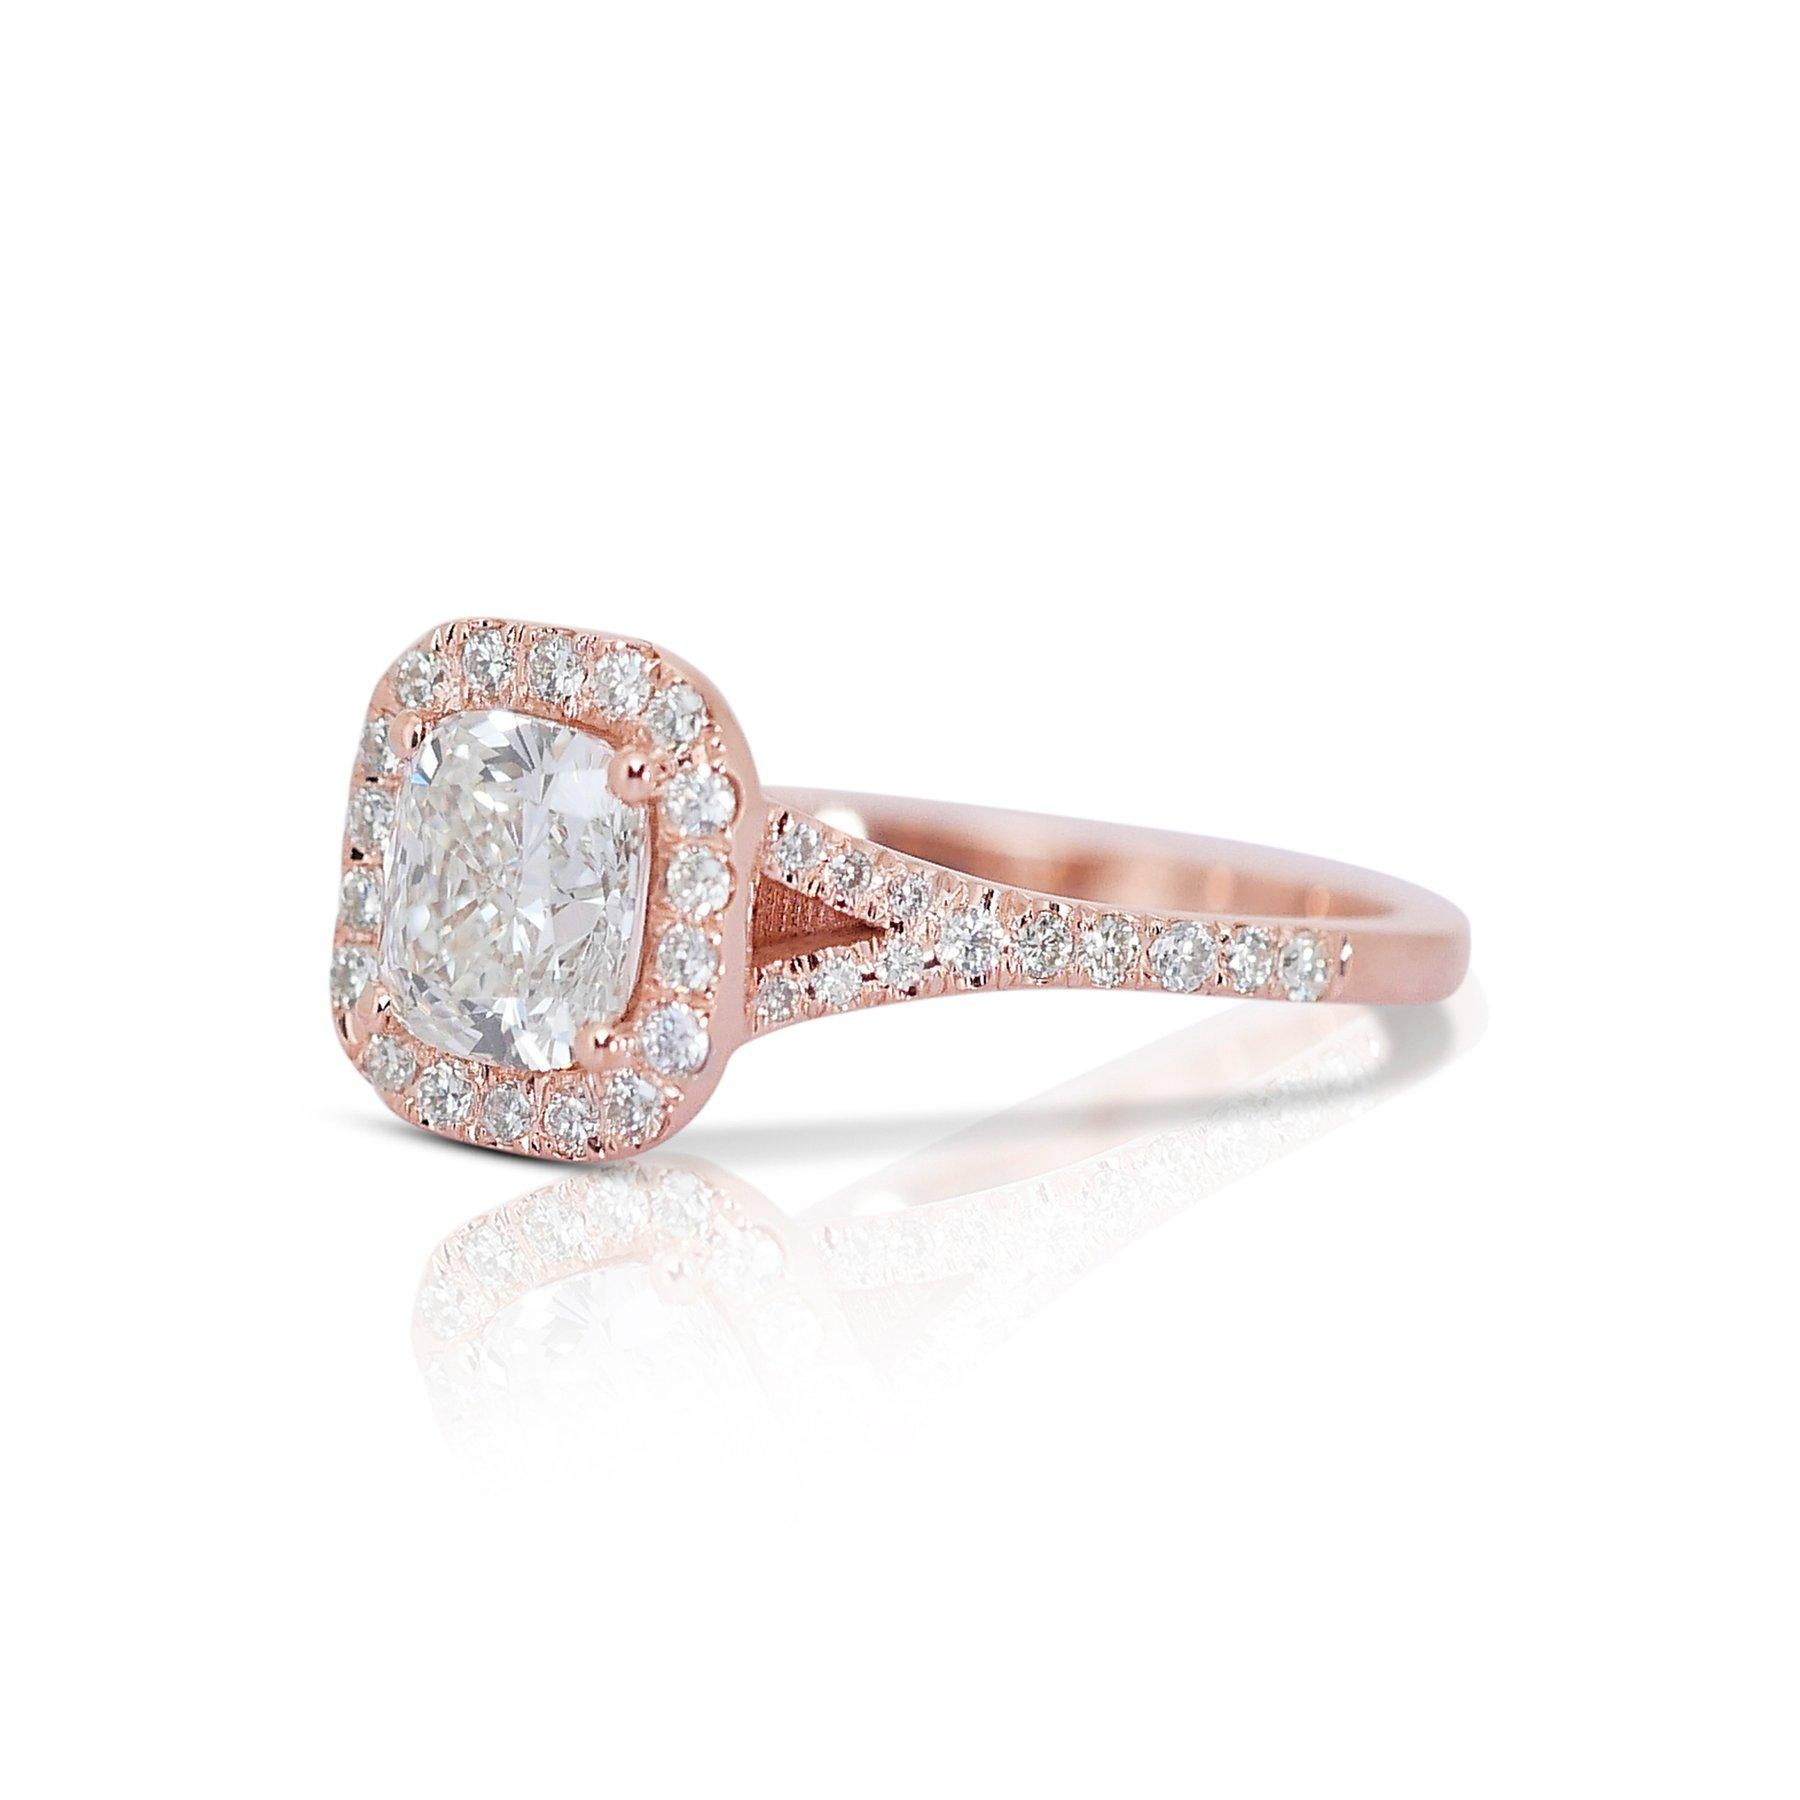 Elegant 1.28ct Diamond Halo Ring in 18k Rose Gold – GIA Certified

This luxurious 18k rose gold halo ring features a stunning 1.02-carat cushion-cut diamond. Complementing the main stone, 24 round diamonds totaling 0.26 carats encircle it, all cut